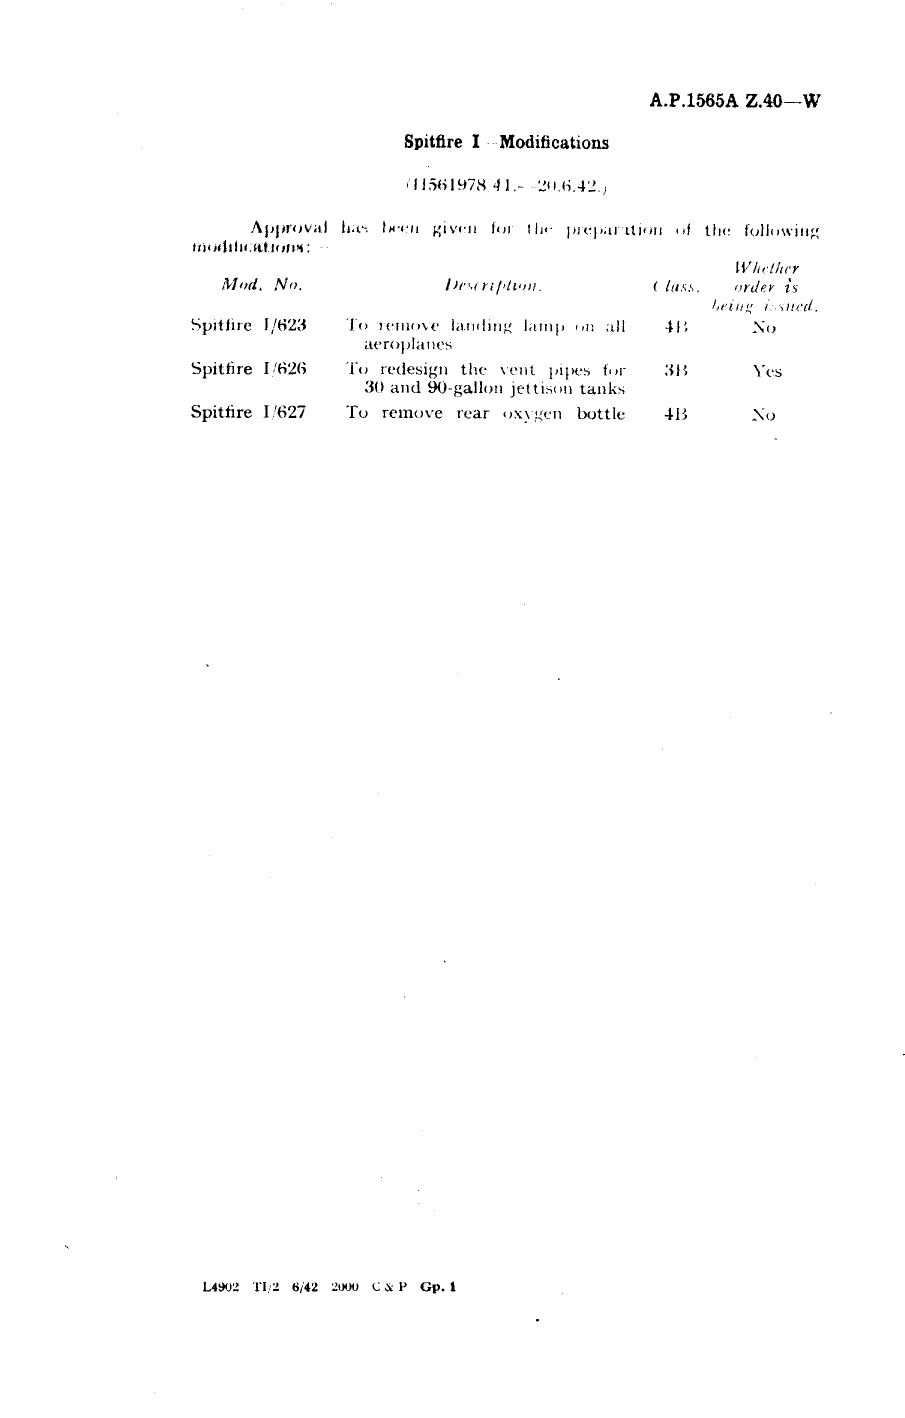 Sample page 1 from AirCorps Library document: Spitfire I Modifications 623, 626, and 627